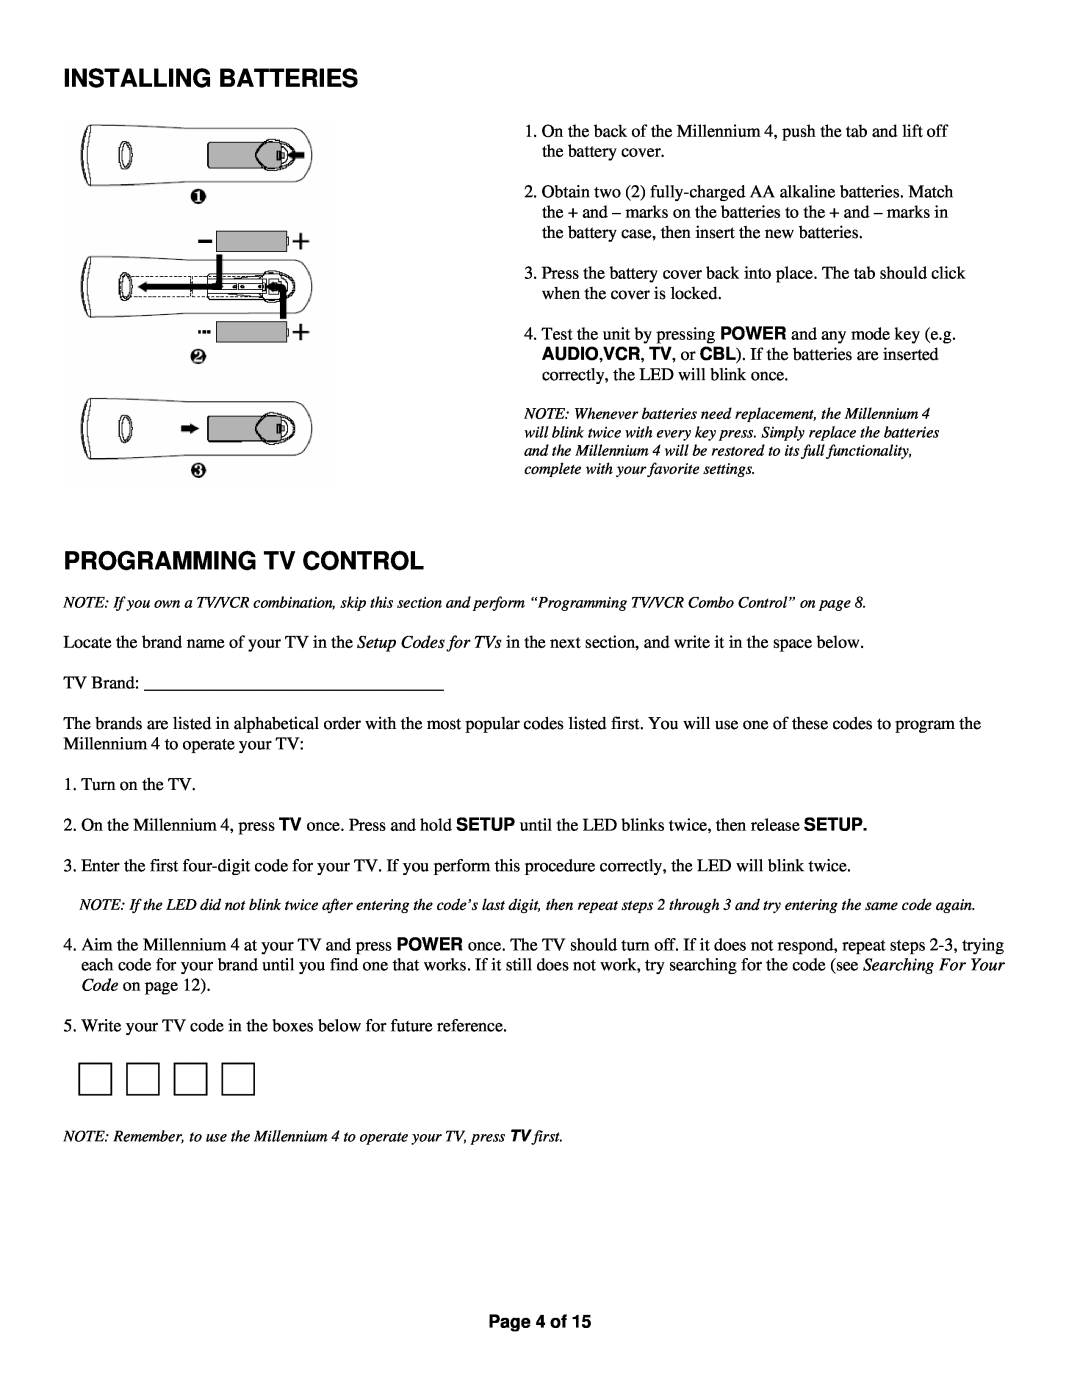 Universal Electronics Millennium 4 manual Installing Batteries, Programming Tv Control, Page 4 of 